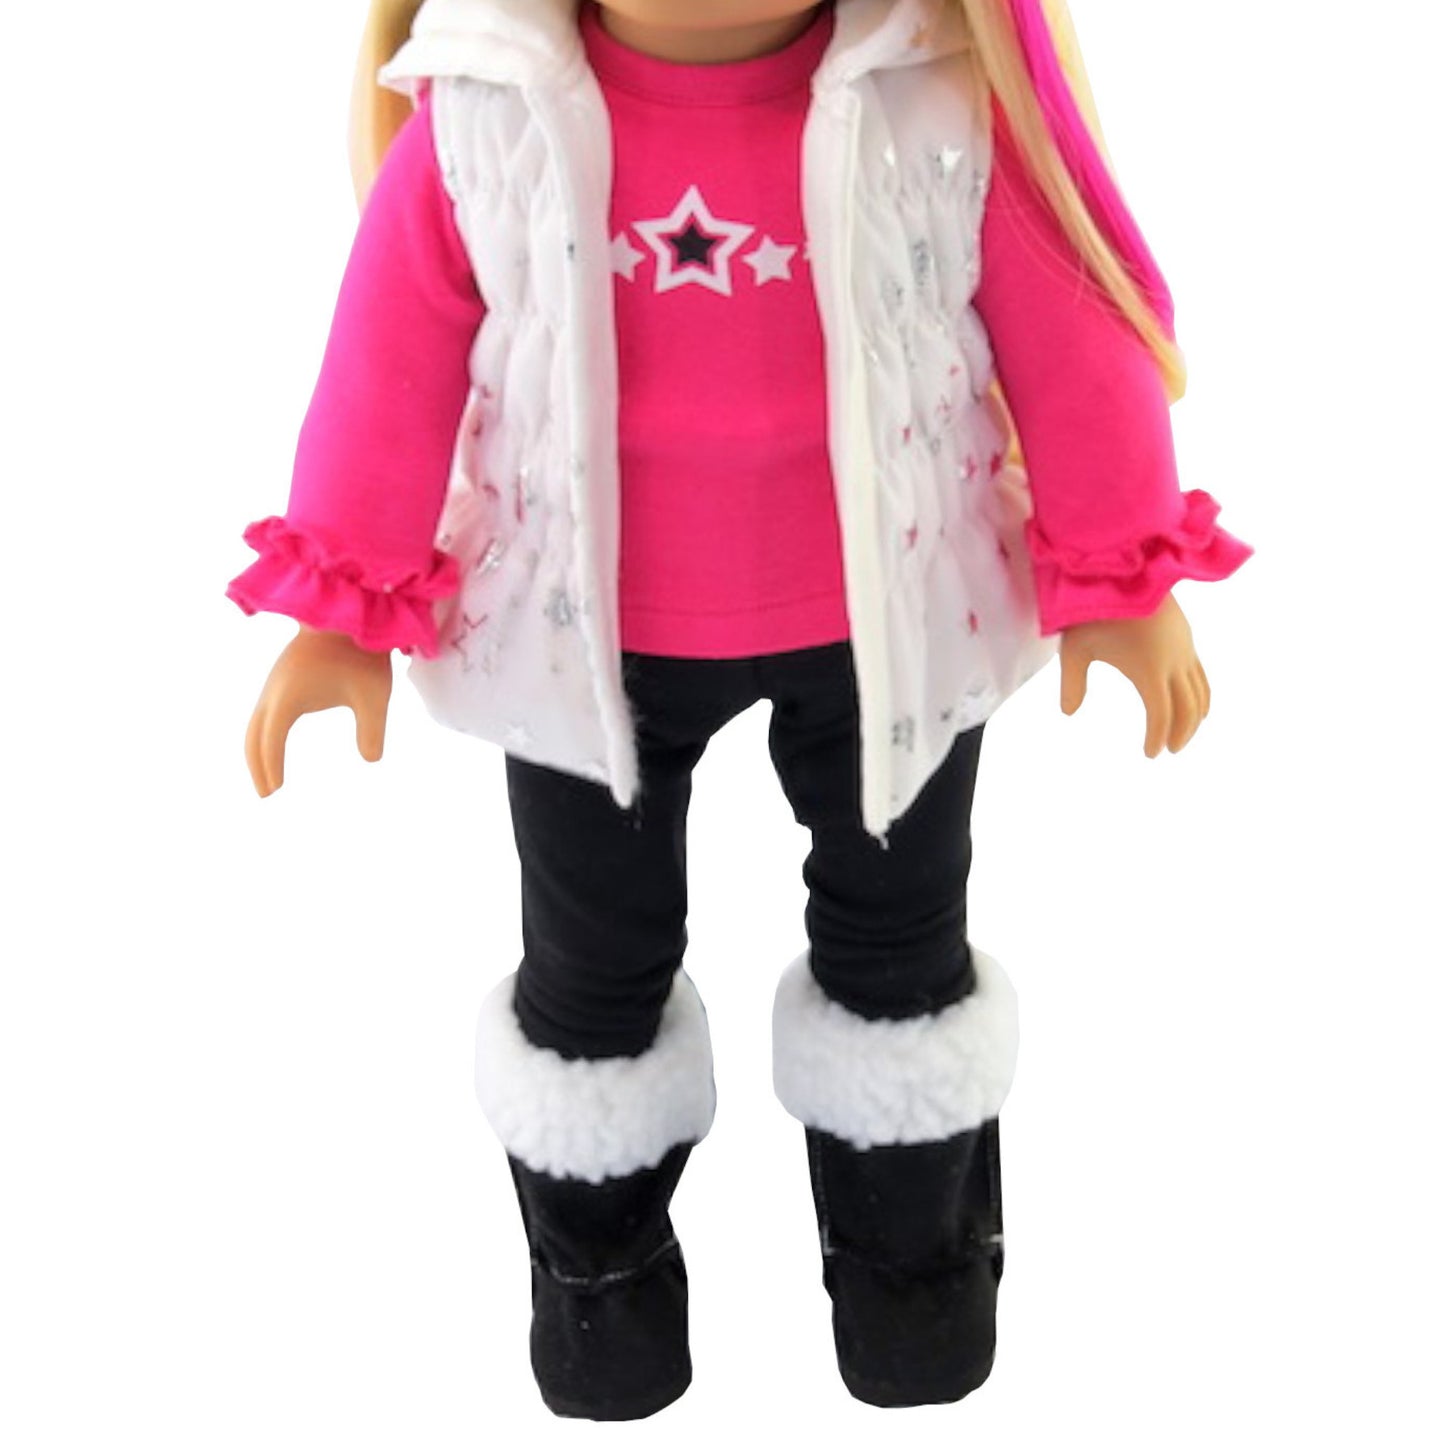 Hot Pink, Black, and White Puffer Vest Pant Set for 18-inch dolls with doll